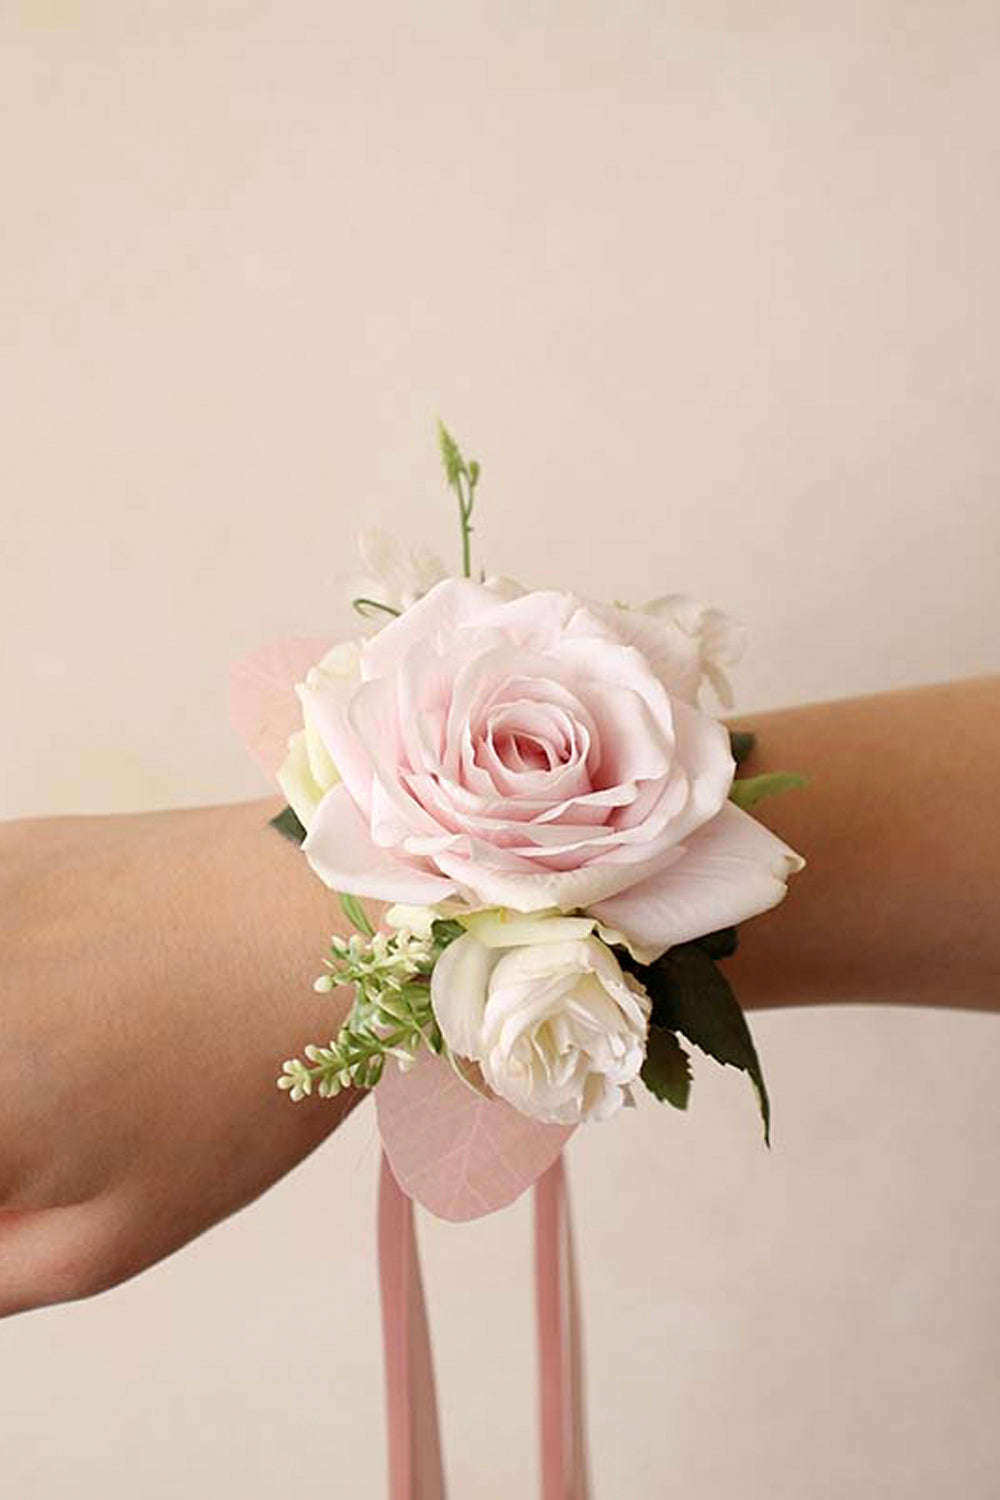 Wholesale Fake Flower Corsage Bridesmaid Bride Wrist Corsage Woodland  Corsage Woven Straw Cuff Bracelet For Wedding Prom Accessories From  Cat11cat, $4.53 | DHgate.Com